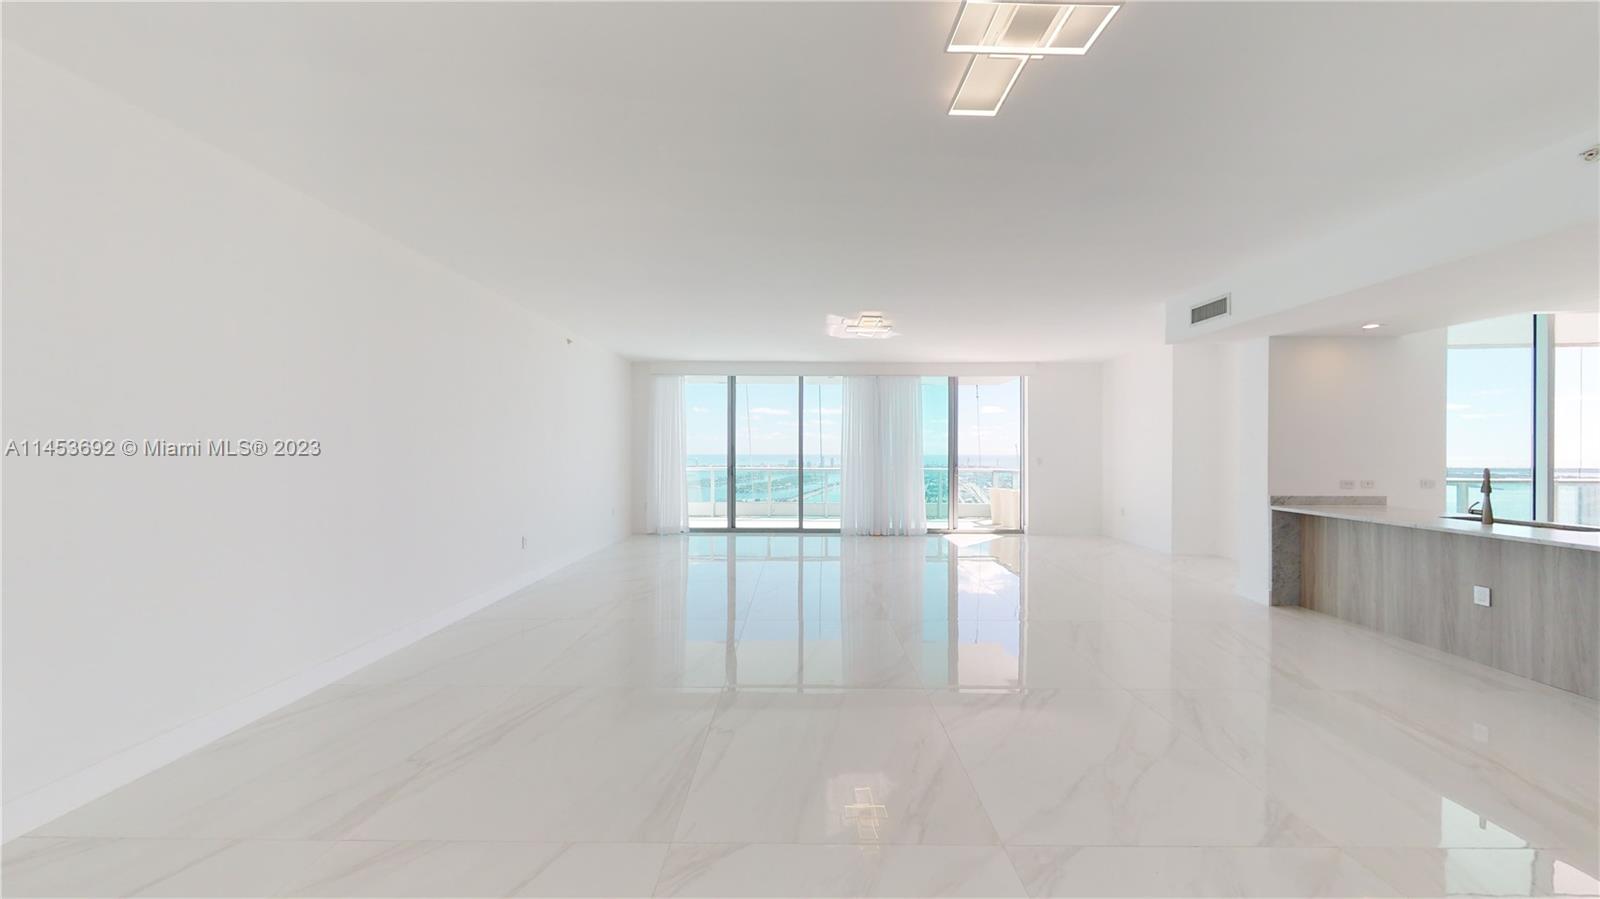 Experience pure luxury in this 3-bedroom, 3.5-bath condo at 900 Biscayne Blvd. With panoramic views of the Bay, Port of Miami, and beaches, this 2,647 sq ft unit features new porcelain floors, custom closets, and an expansive terrace. Enjoy 24hr concierge, two pools, a gym, spa, theater, and more. Central location near Museum Park, Adrienne Arsht Center, and FTX Arena. One parking space included.